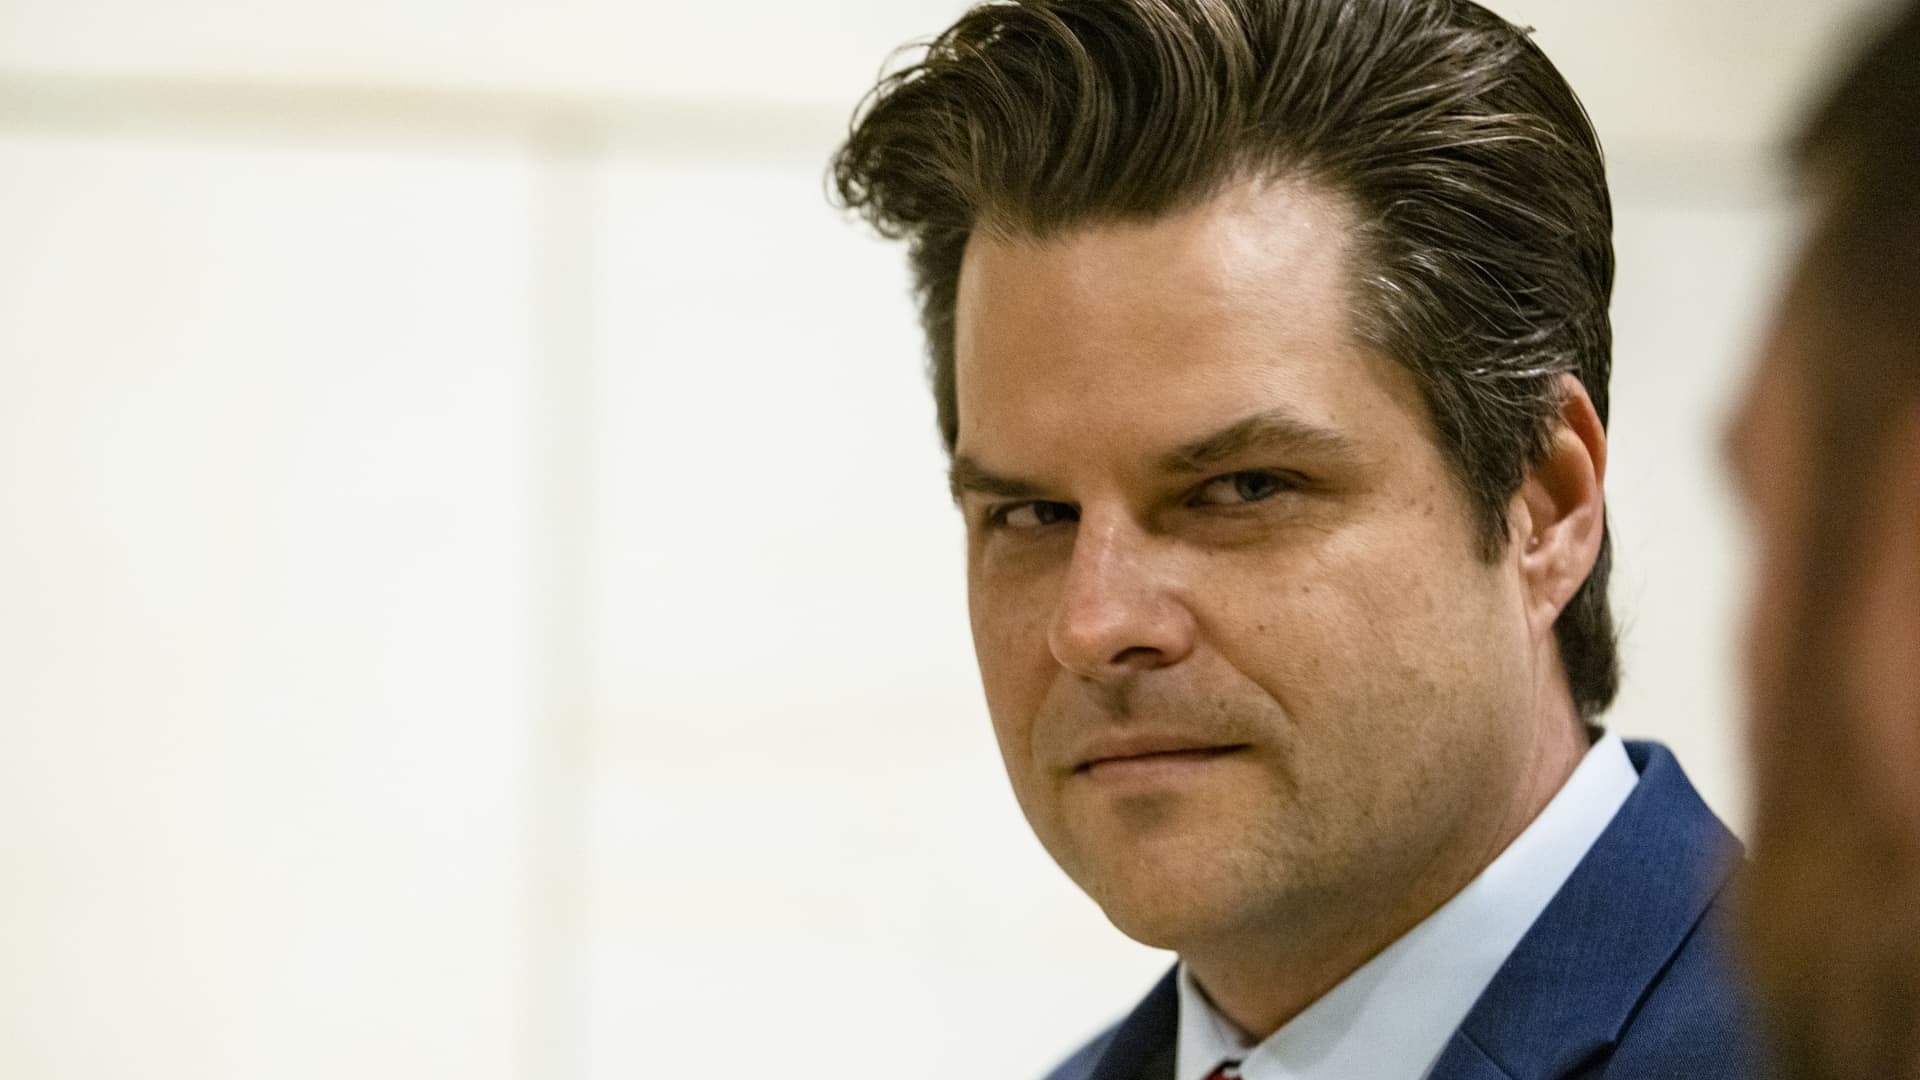 Representative Matt Gaetz, a Republican from Florida, arrives to a House GOP conference meeting at the U.S. Capitol in Washington, D.C., U.S., on Friday, May 14, 2021.